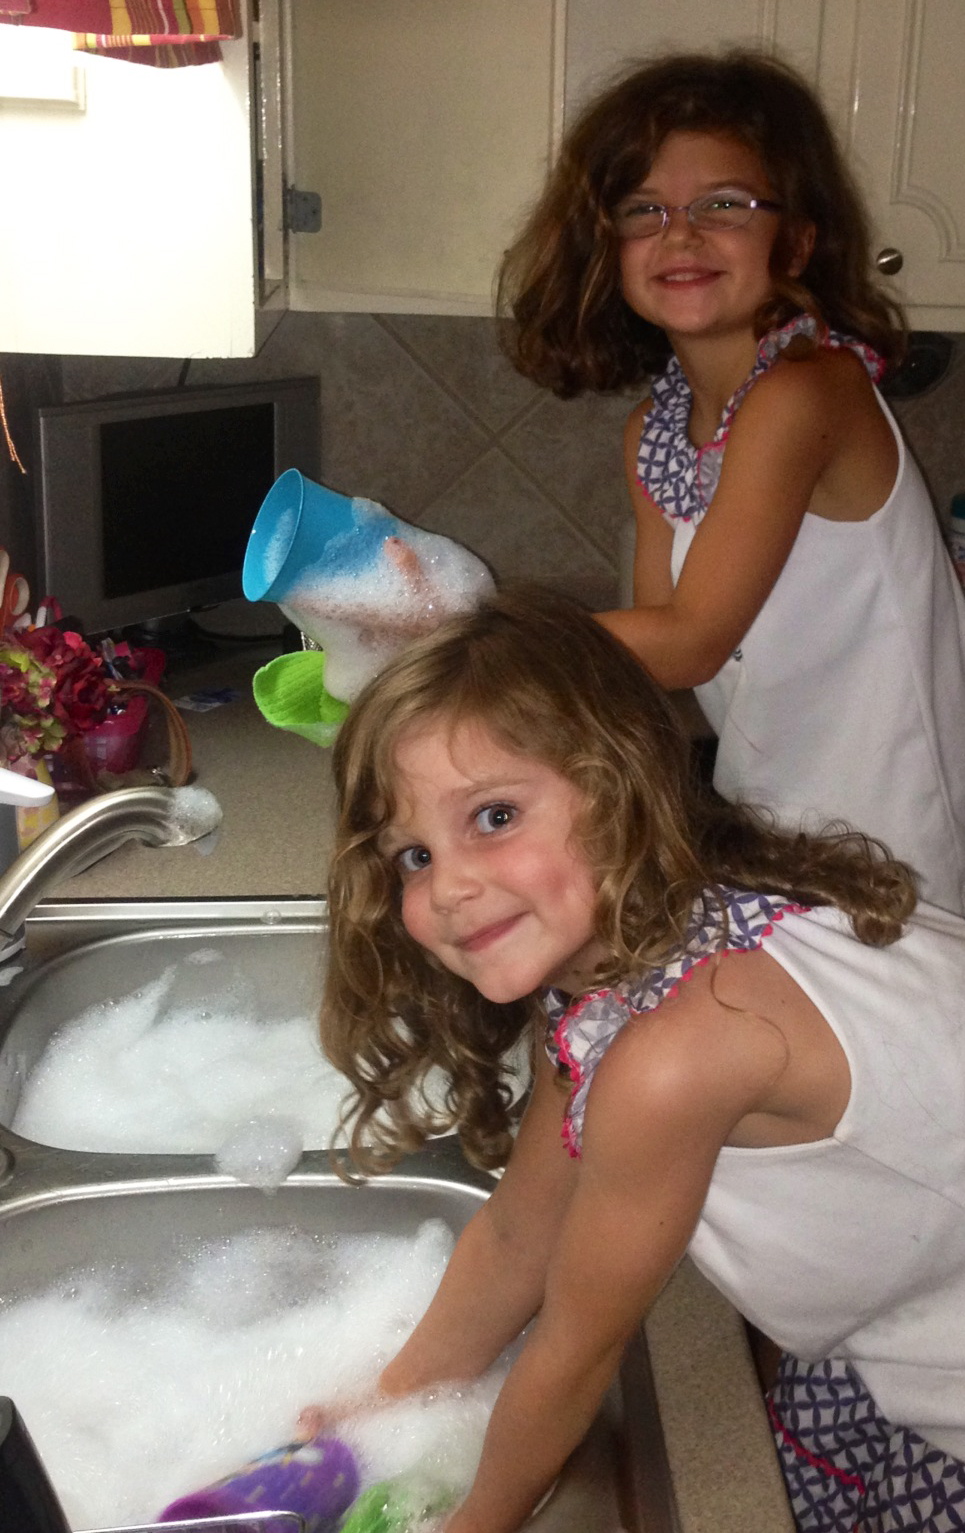 Two little kids washing dishes in the sink